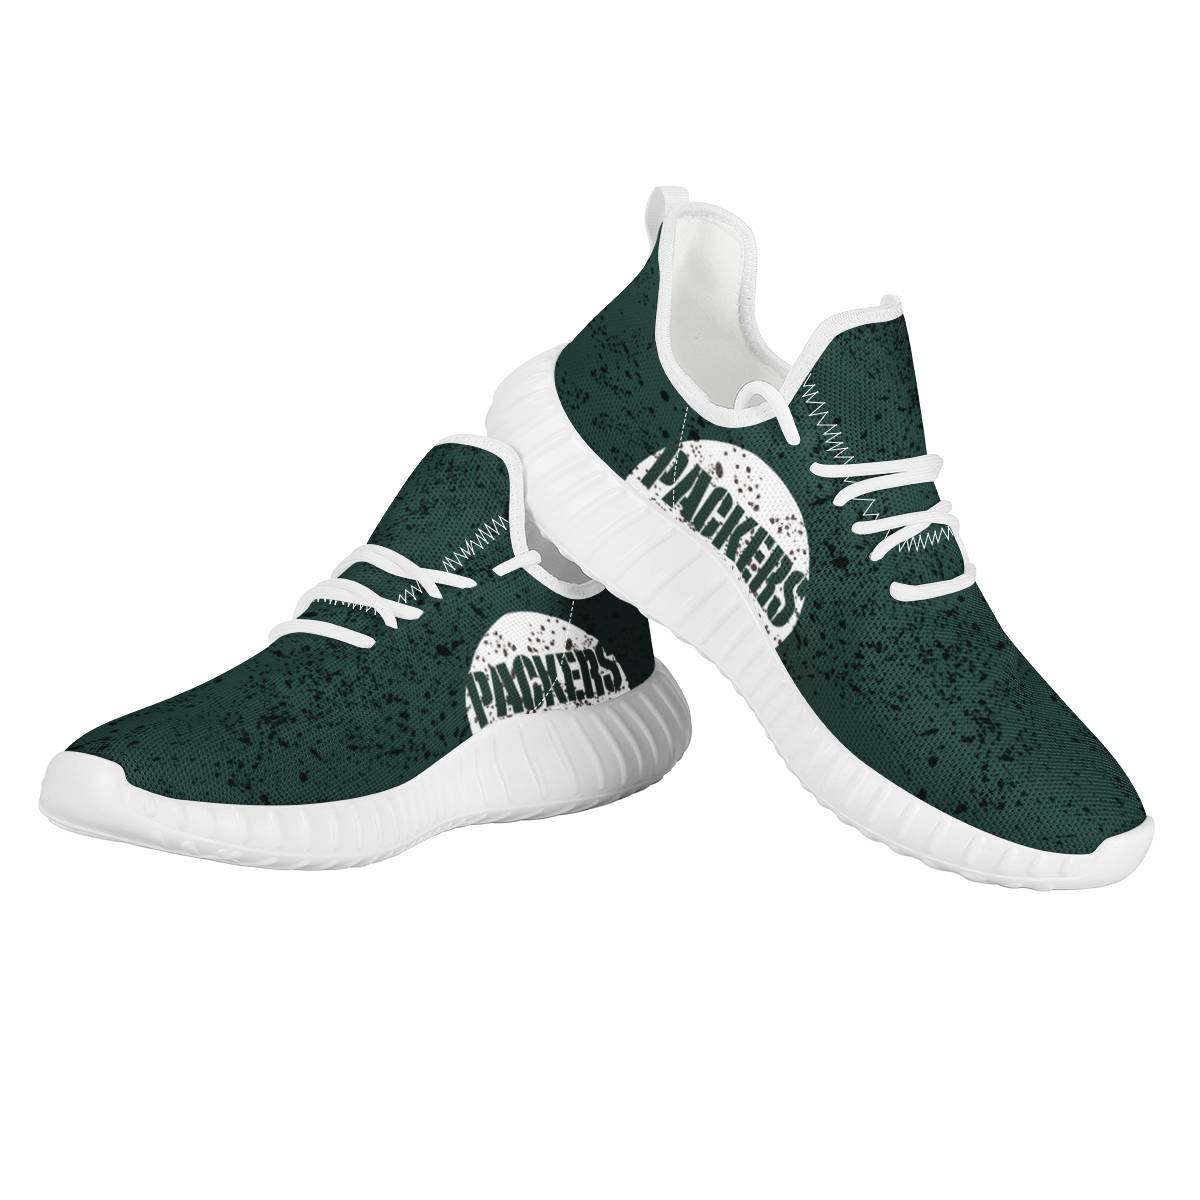 Men's Green Bay Packers Mesh Knit Sneakers/Shoes 019